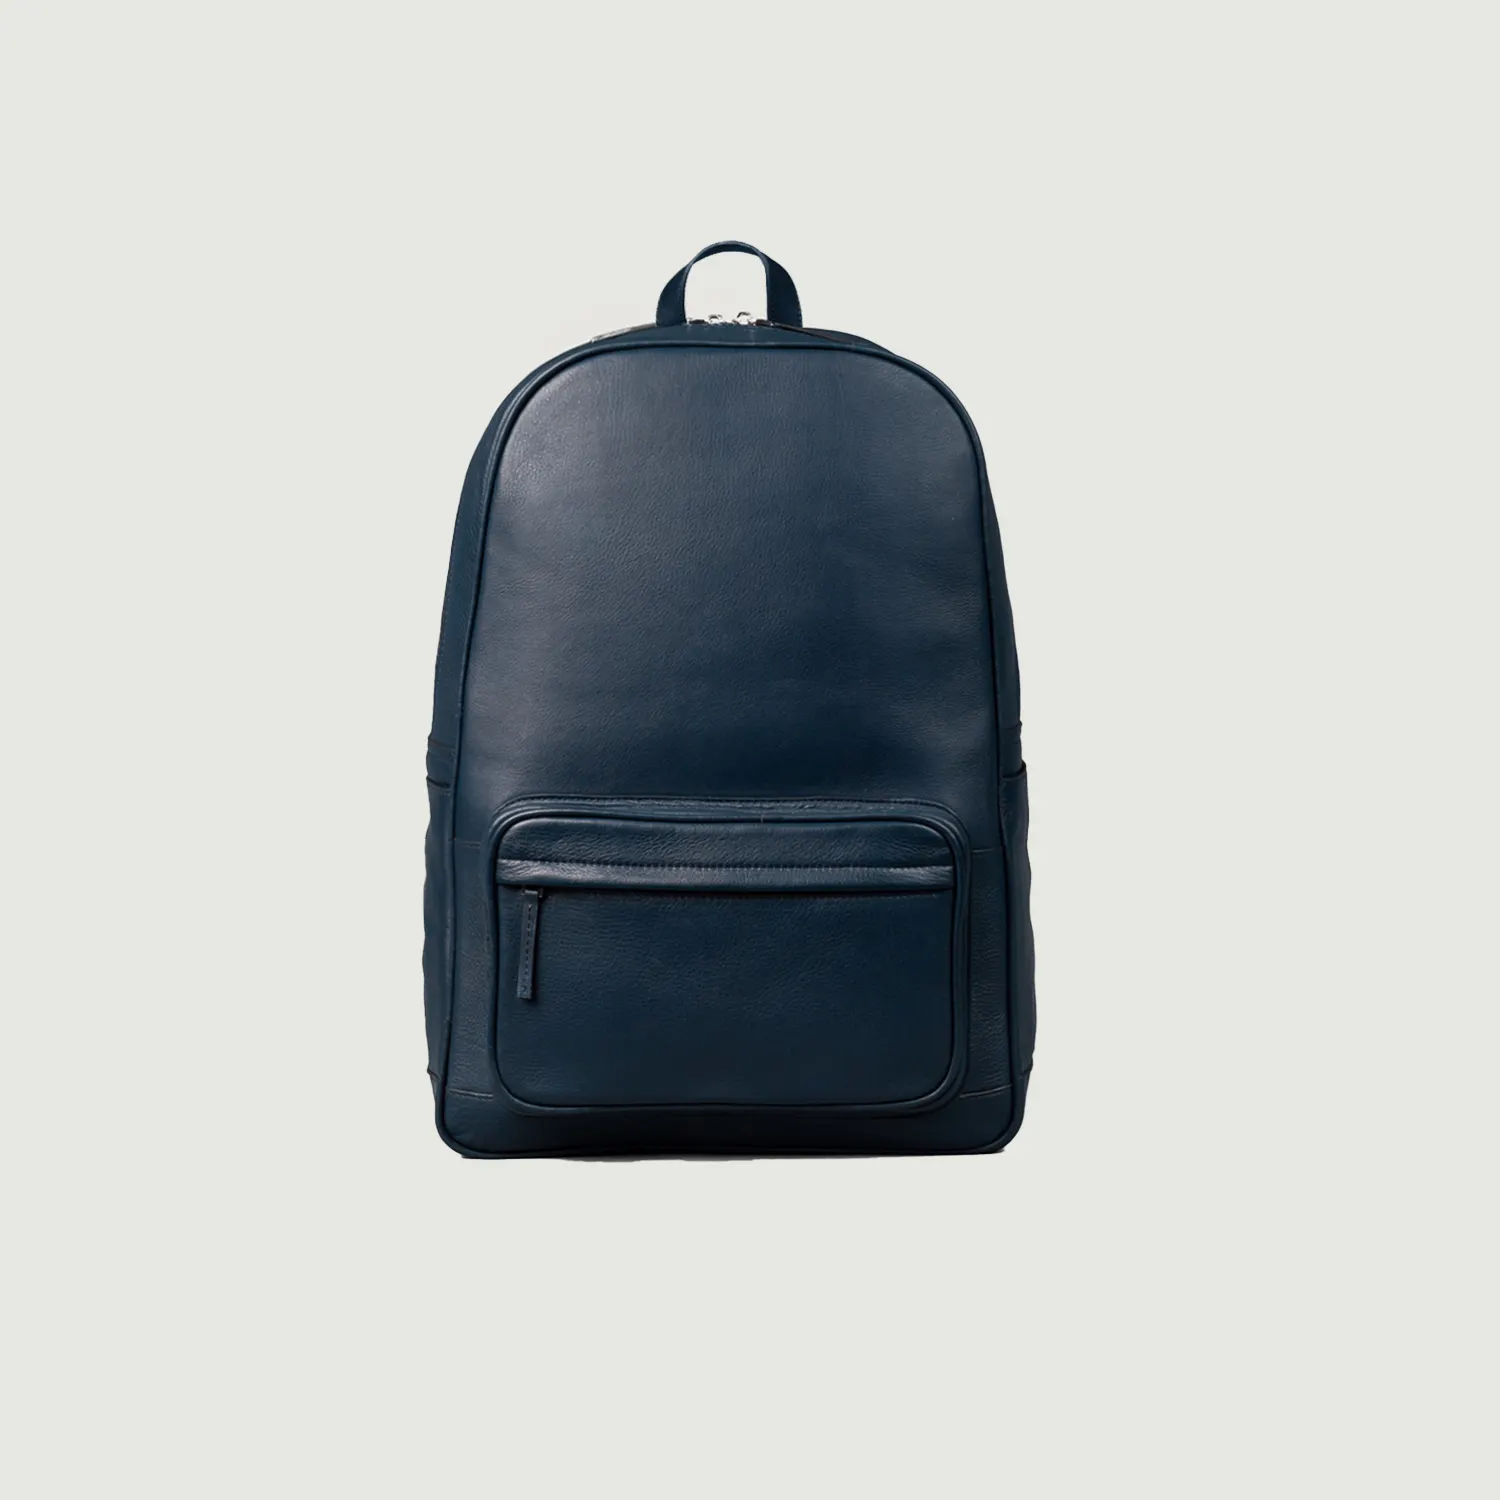 Midnight Blue 100% Real Leather Full Grain Naturally Milled Cowhide Leather Backpack with Cotton Twill Inside and Two-Way Zipper